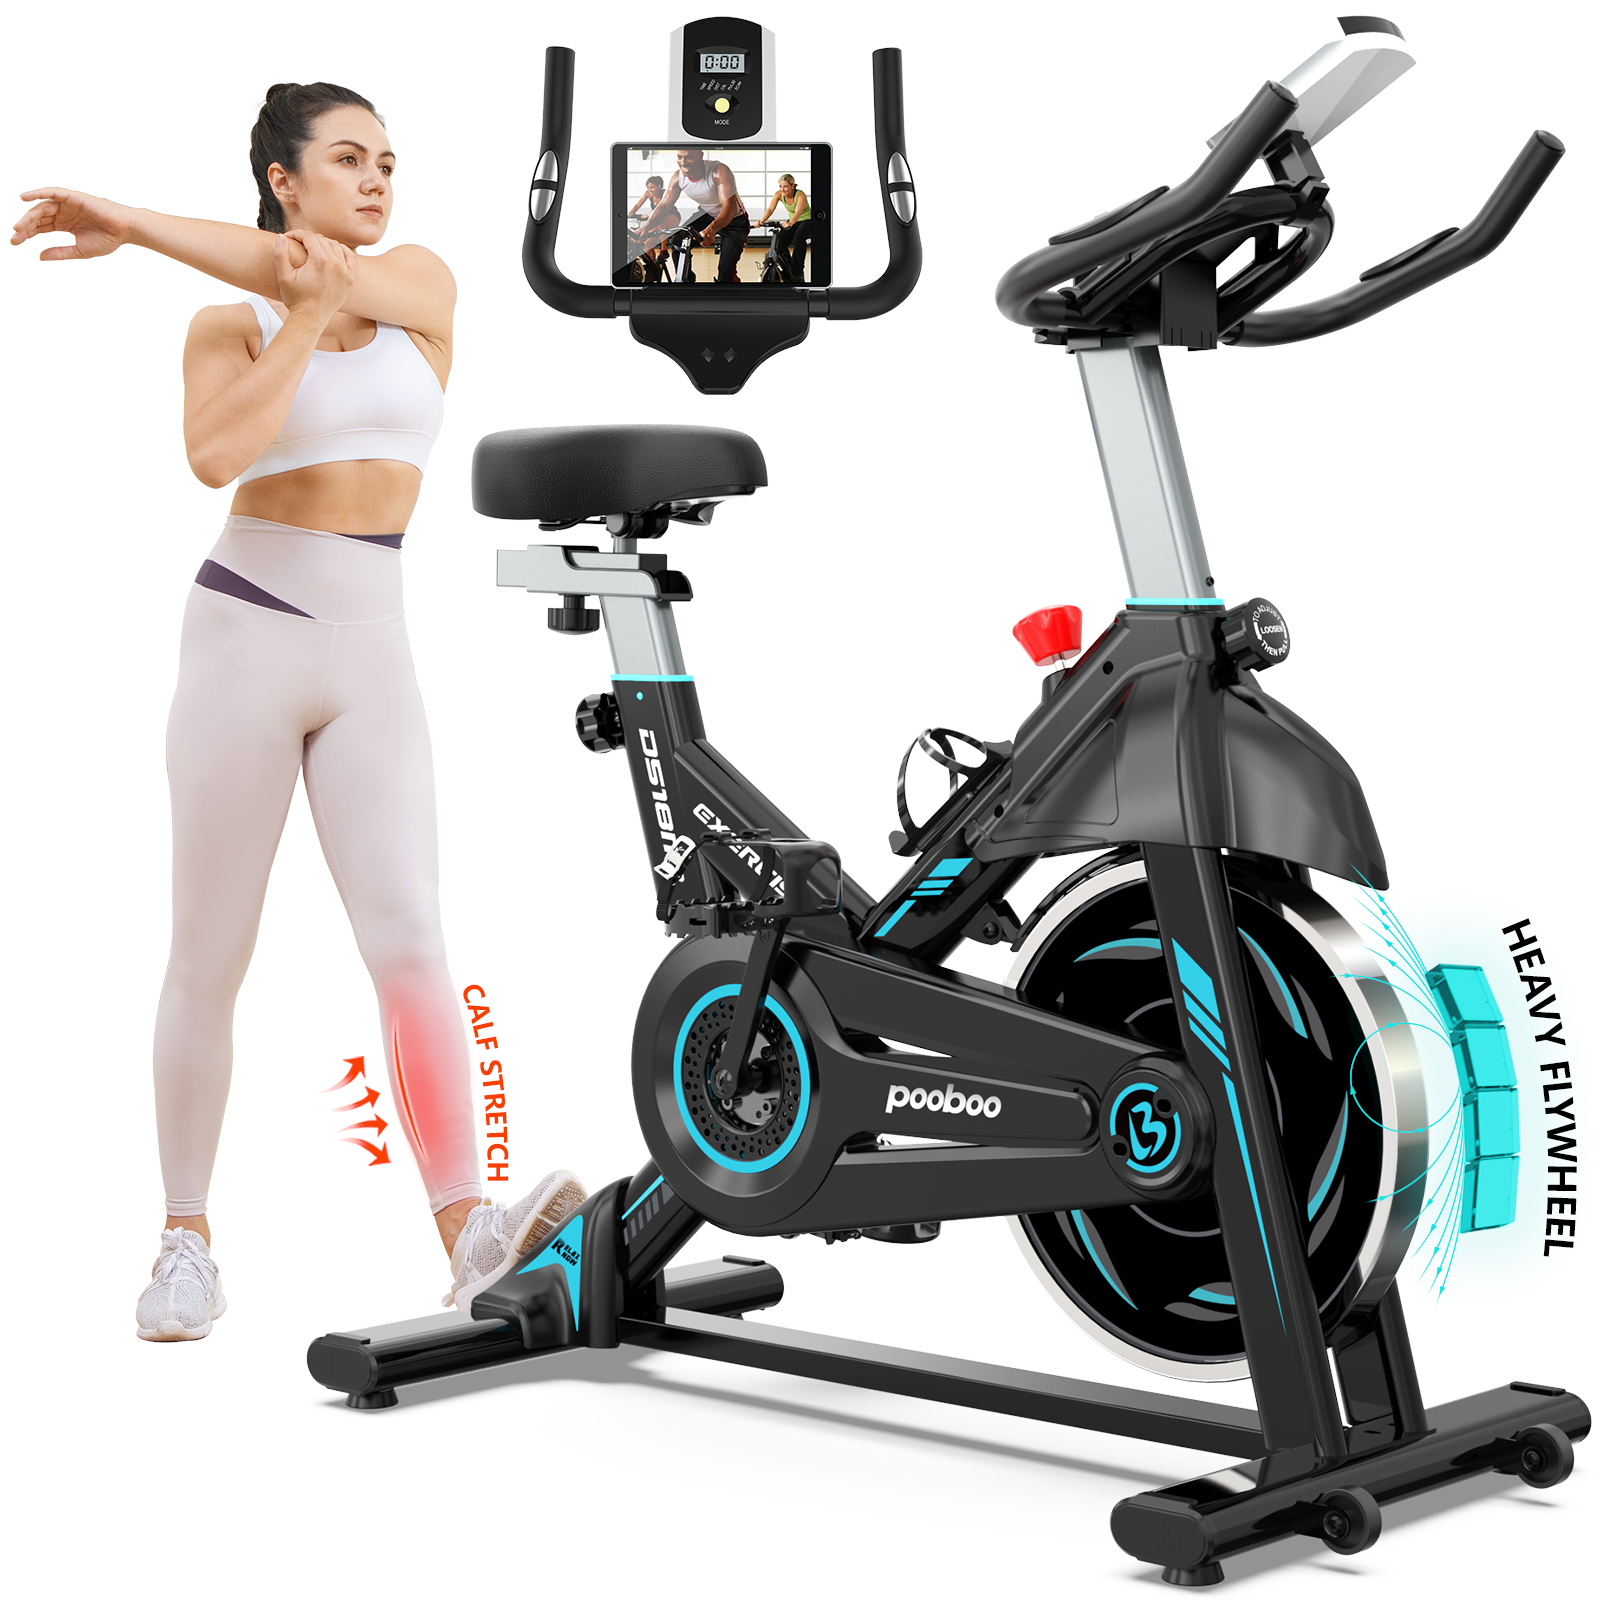 Pooboo Indoor Cycling Bike Magnetic Stationary Exercise Bikes Home Cardio Workout Bicycle Machine 350lb Flywheel Weight 40lbs - image 2 of 14